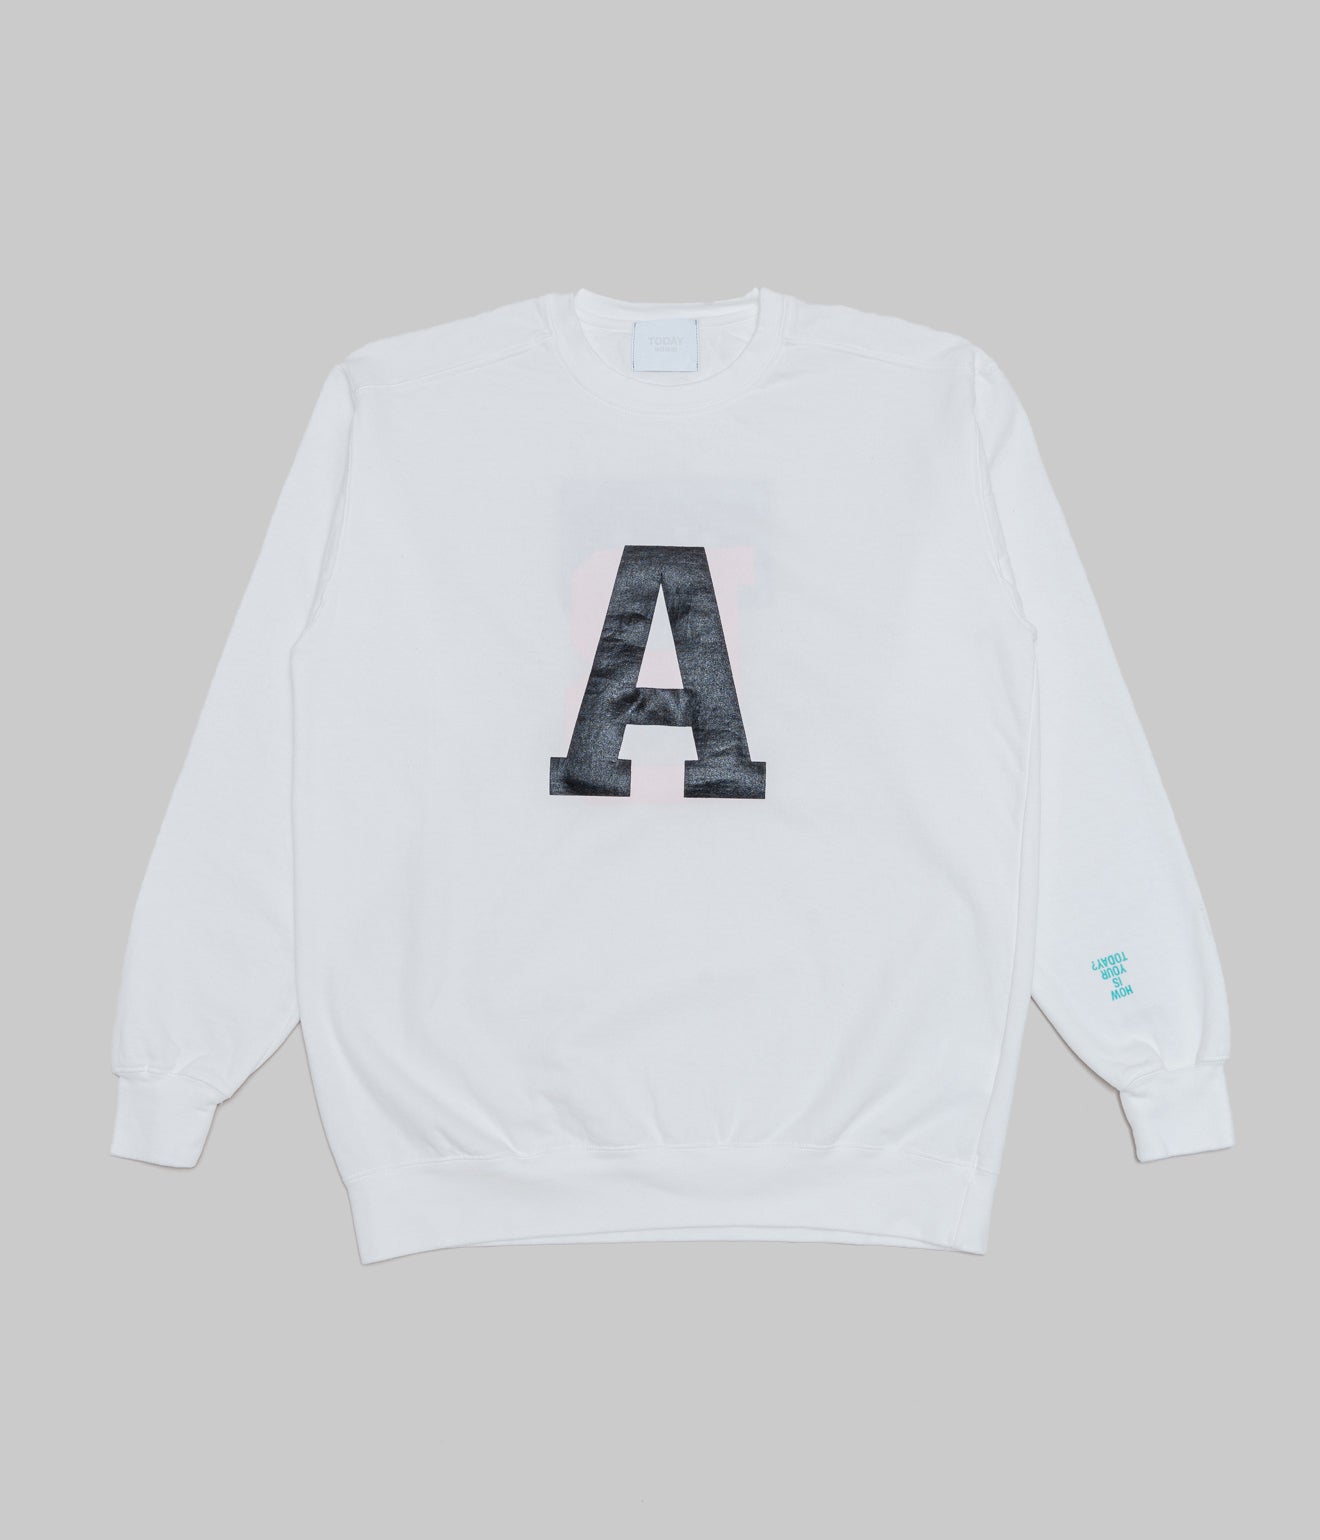 TODAY edition "A,B Reversible Sweat" WHITE - WEAREALLANIMALS